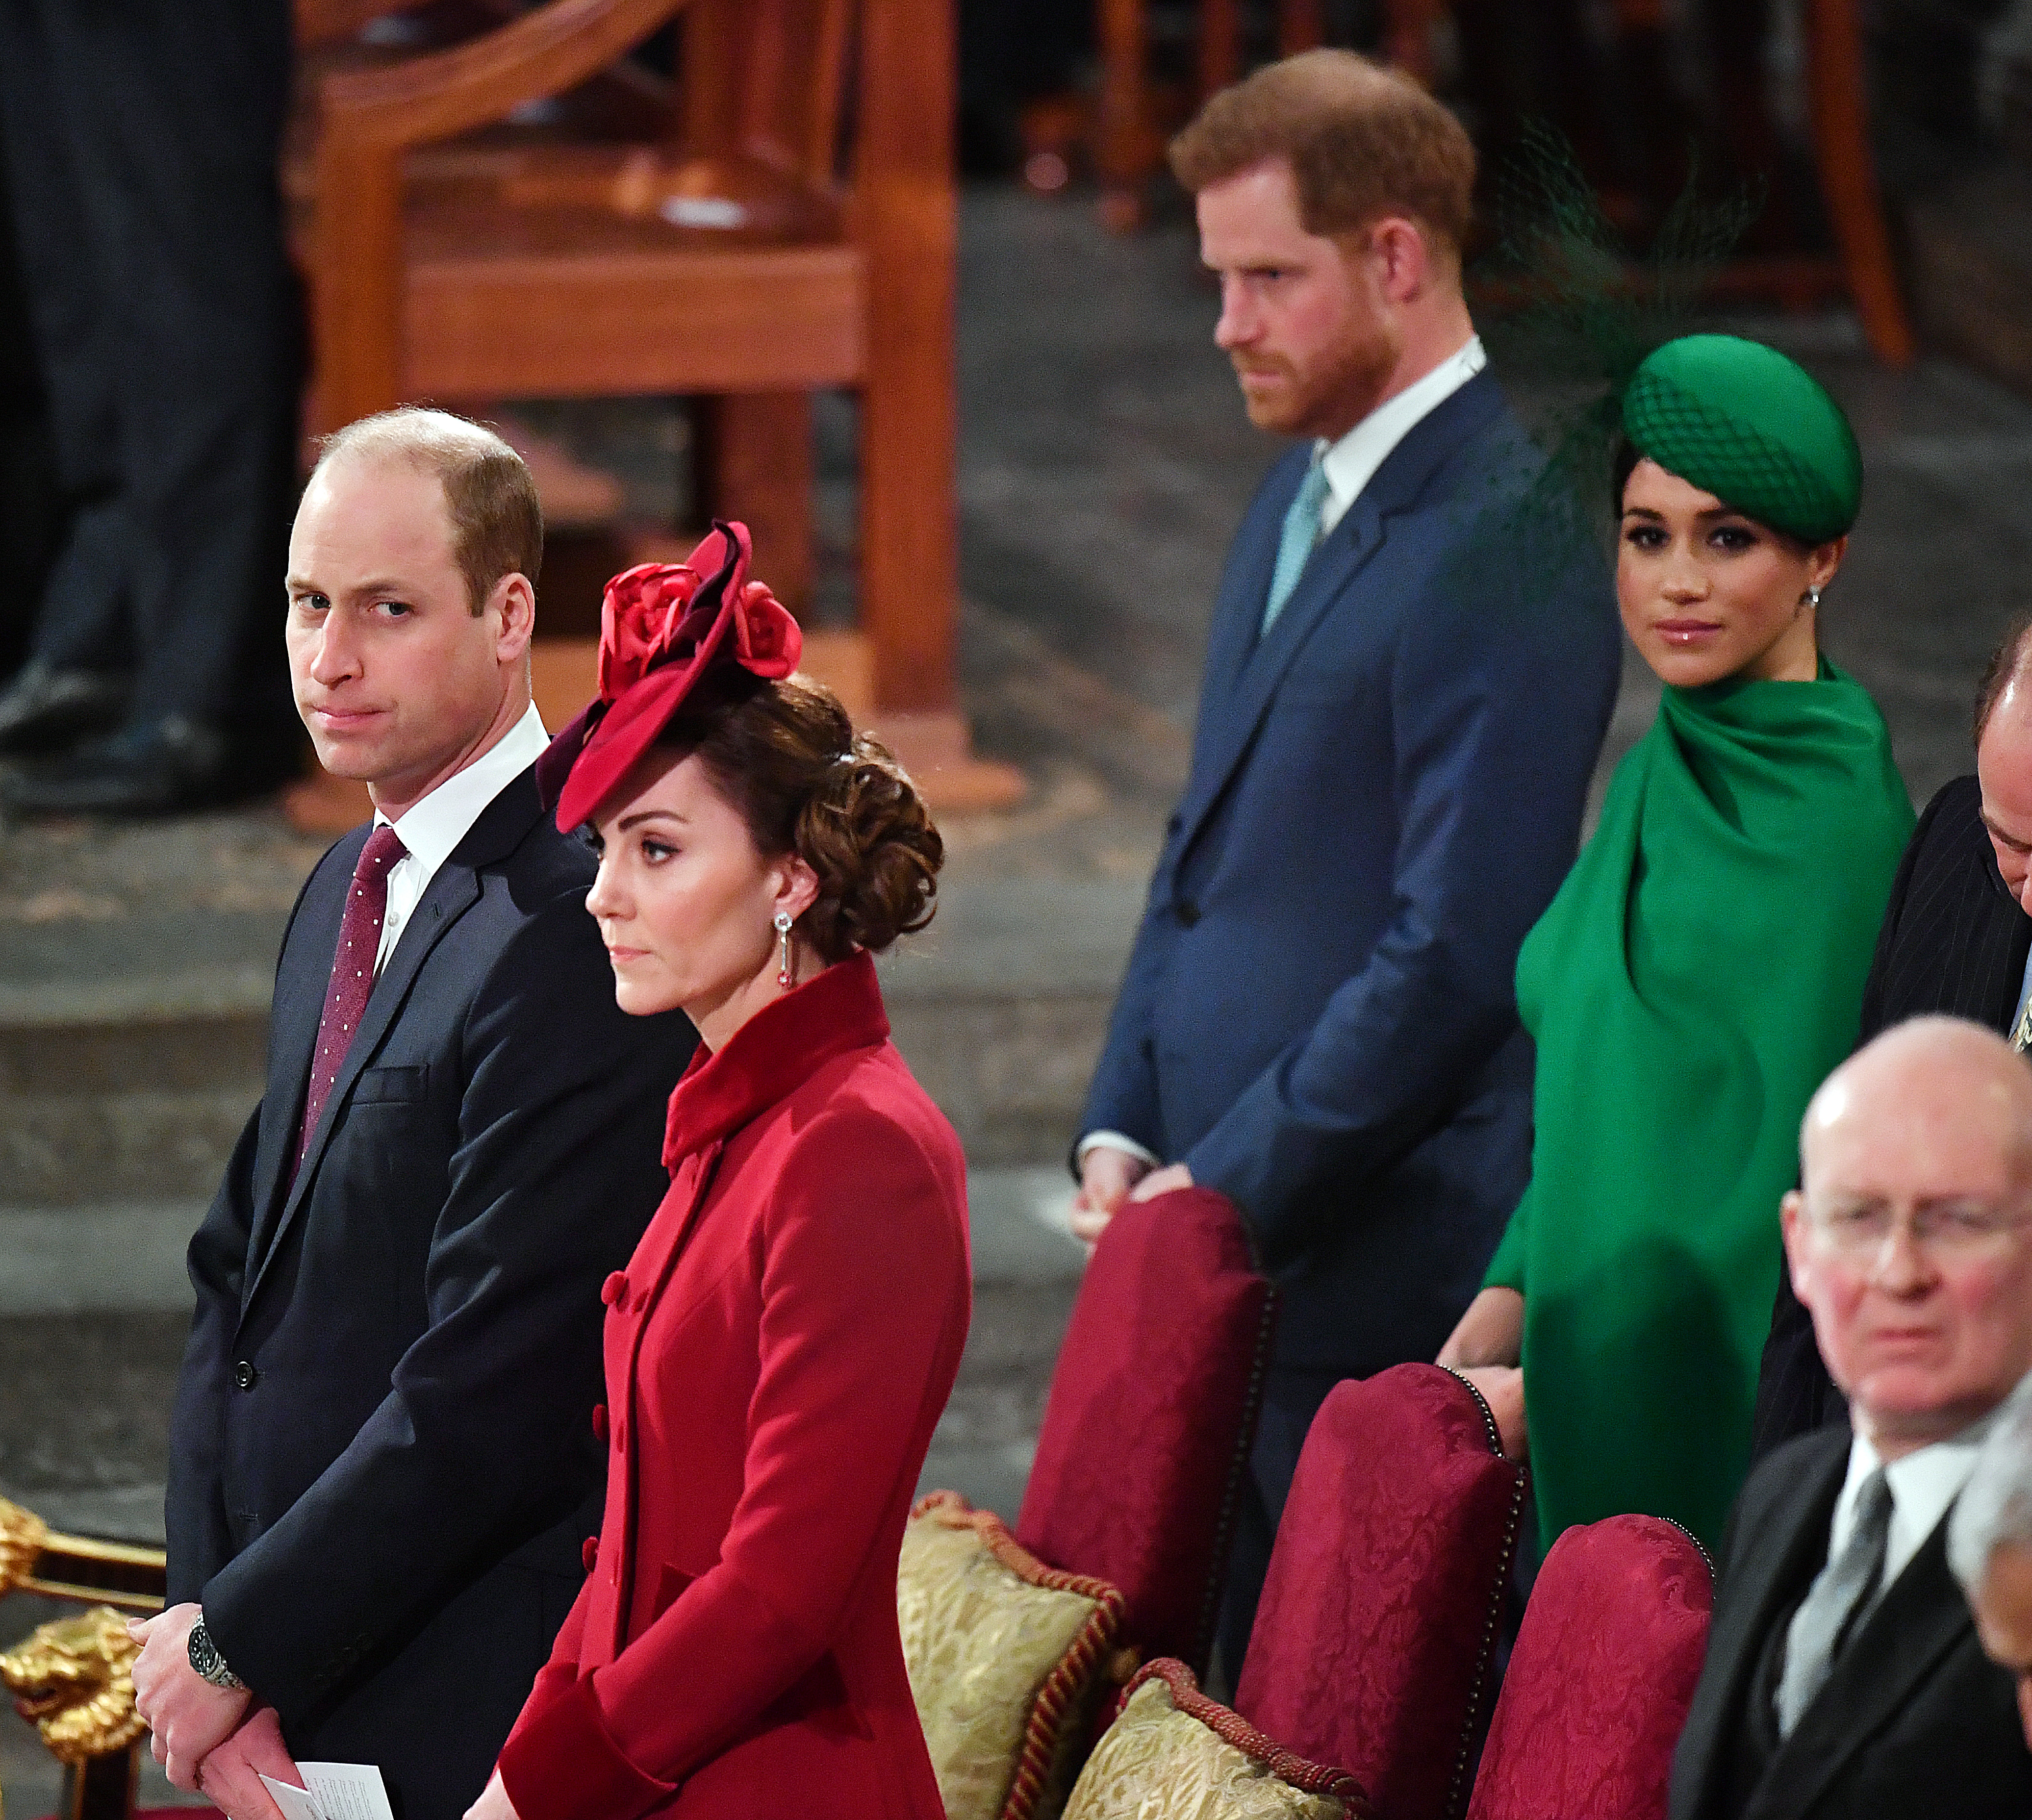 Prince William, Princess Catherine, Prince Harry, and Meghan Markle during the Commonwealth Day Service 2020 on March 9, 2020 in London, England | Source: Getty Images